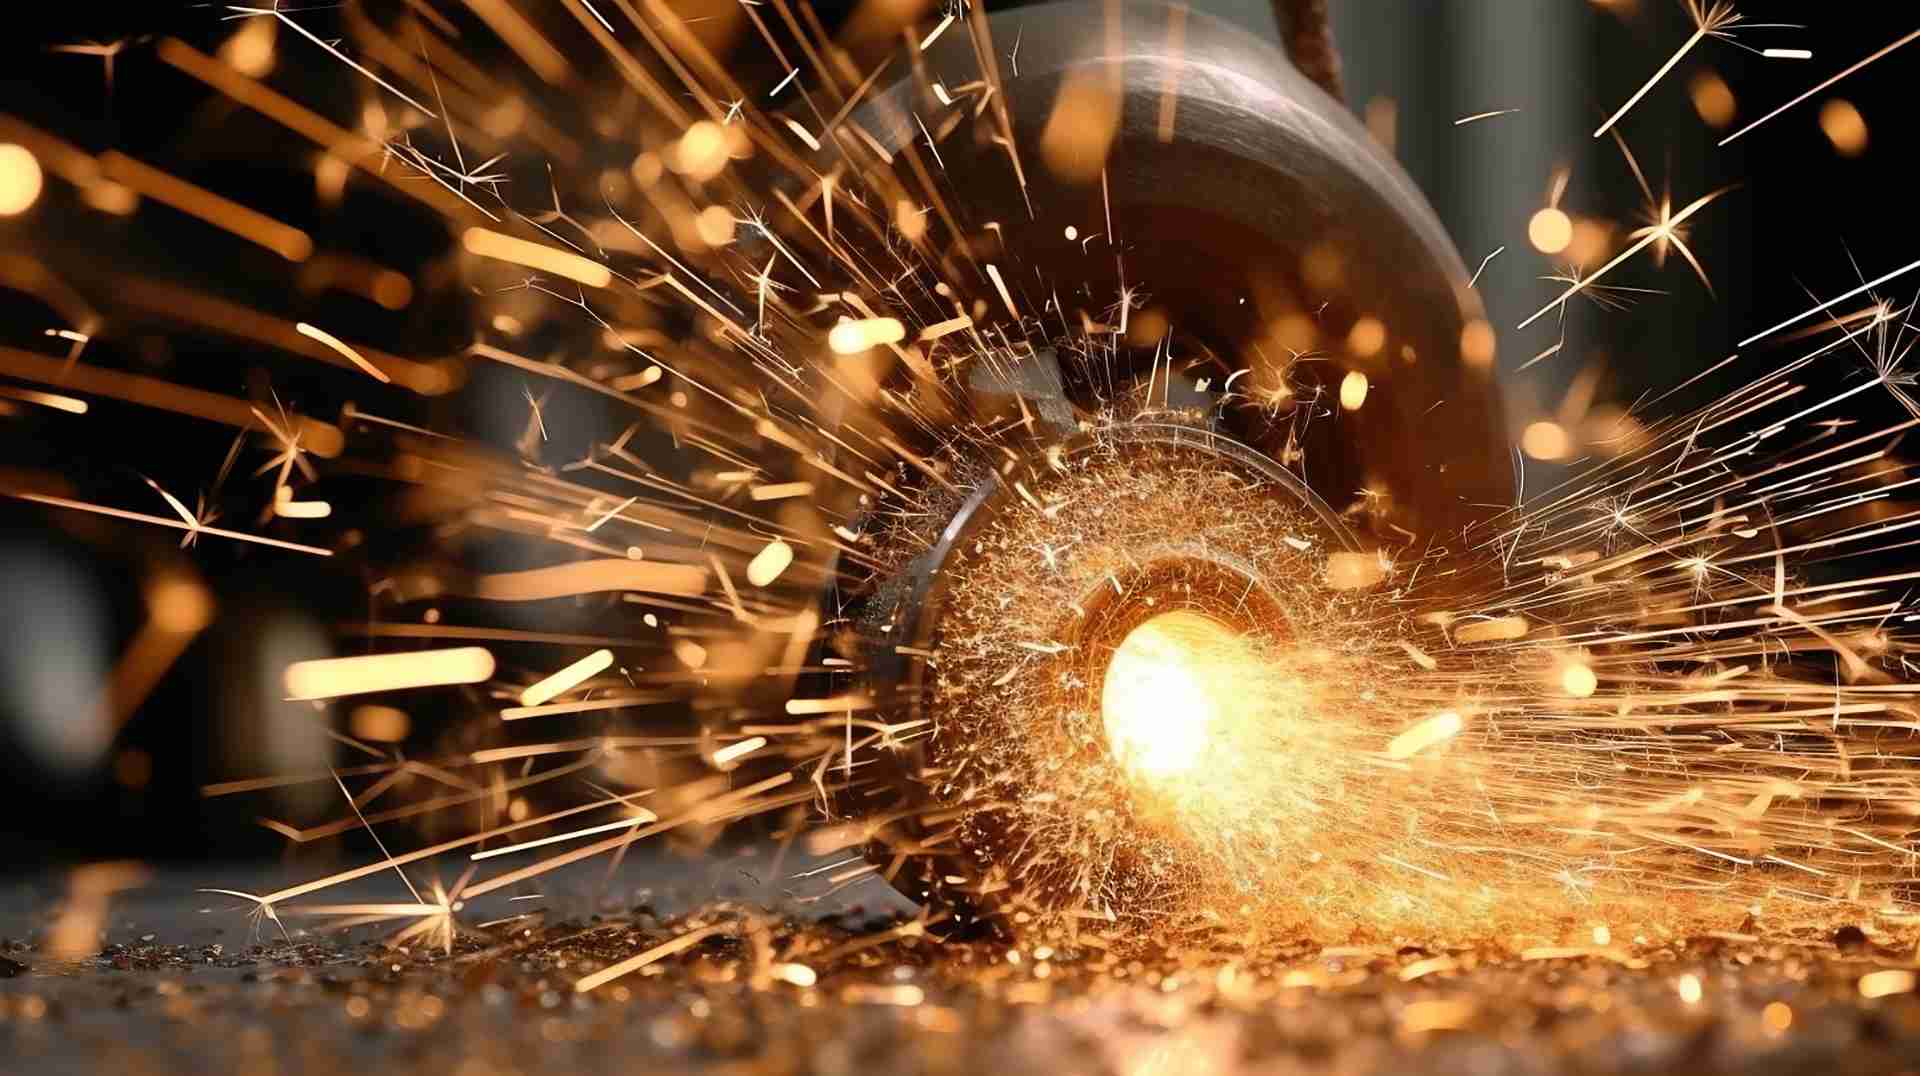 sparks flying while grinding and finishing metal